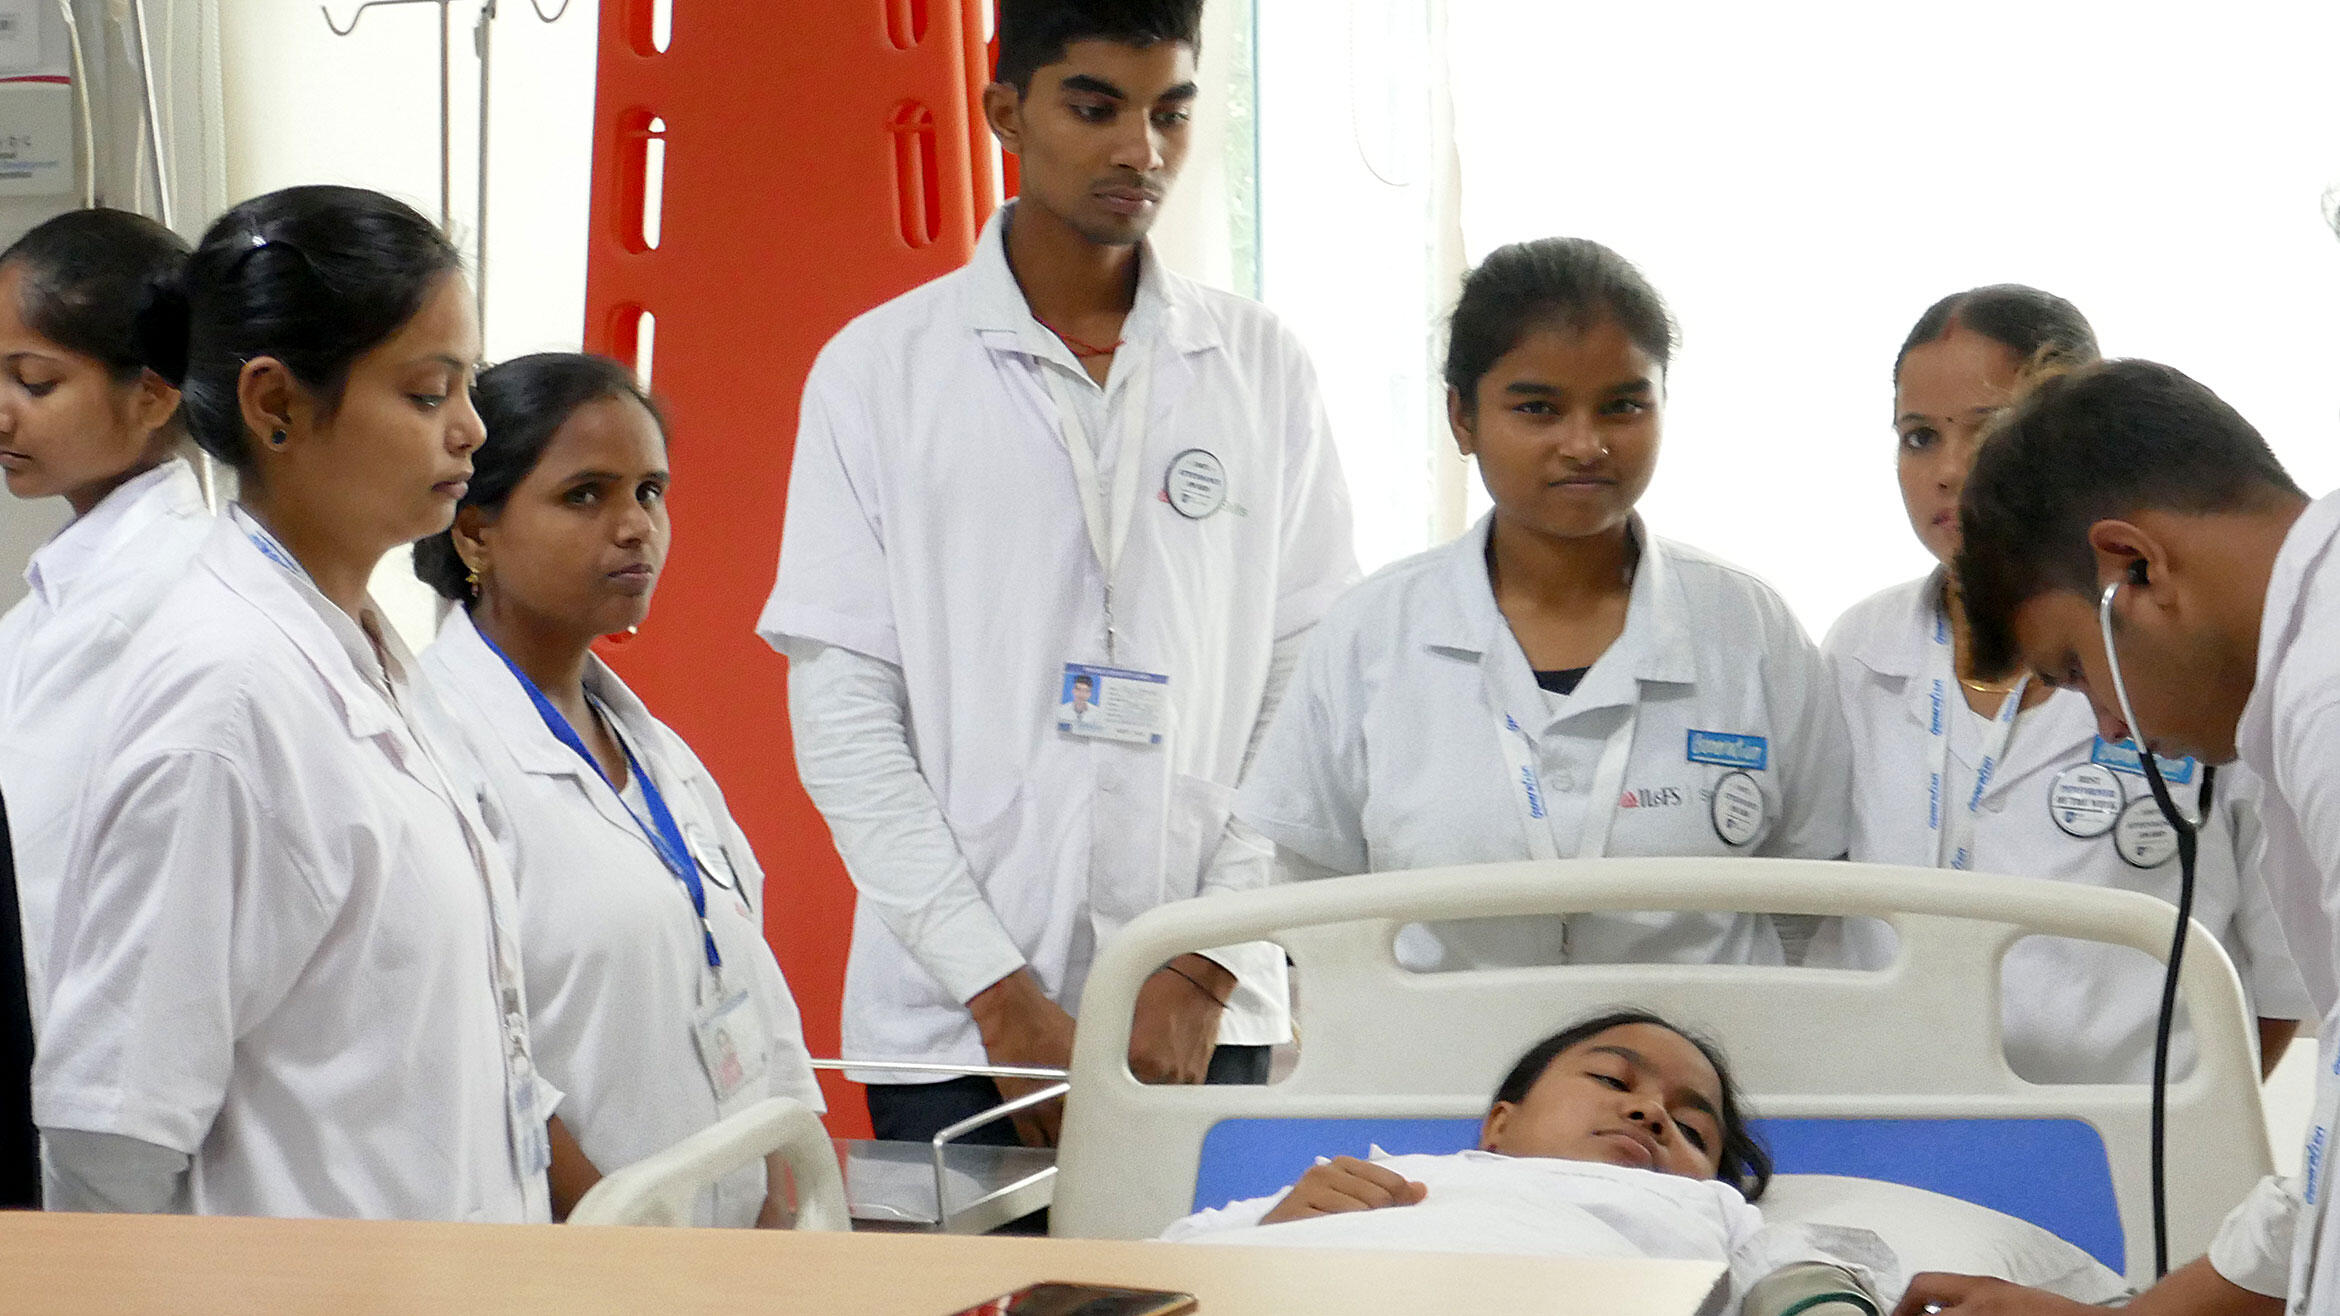 Indians in doctor's coats stand around a sick bed